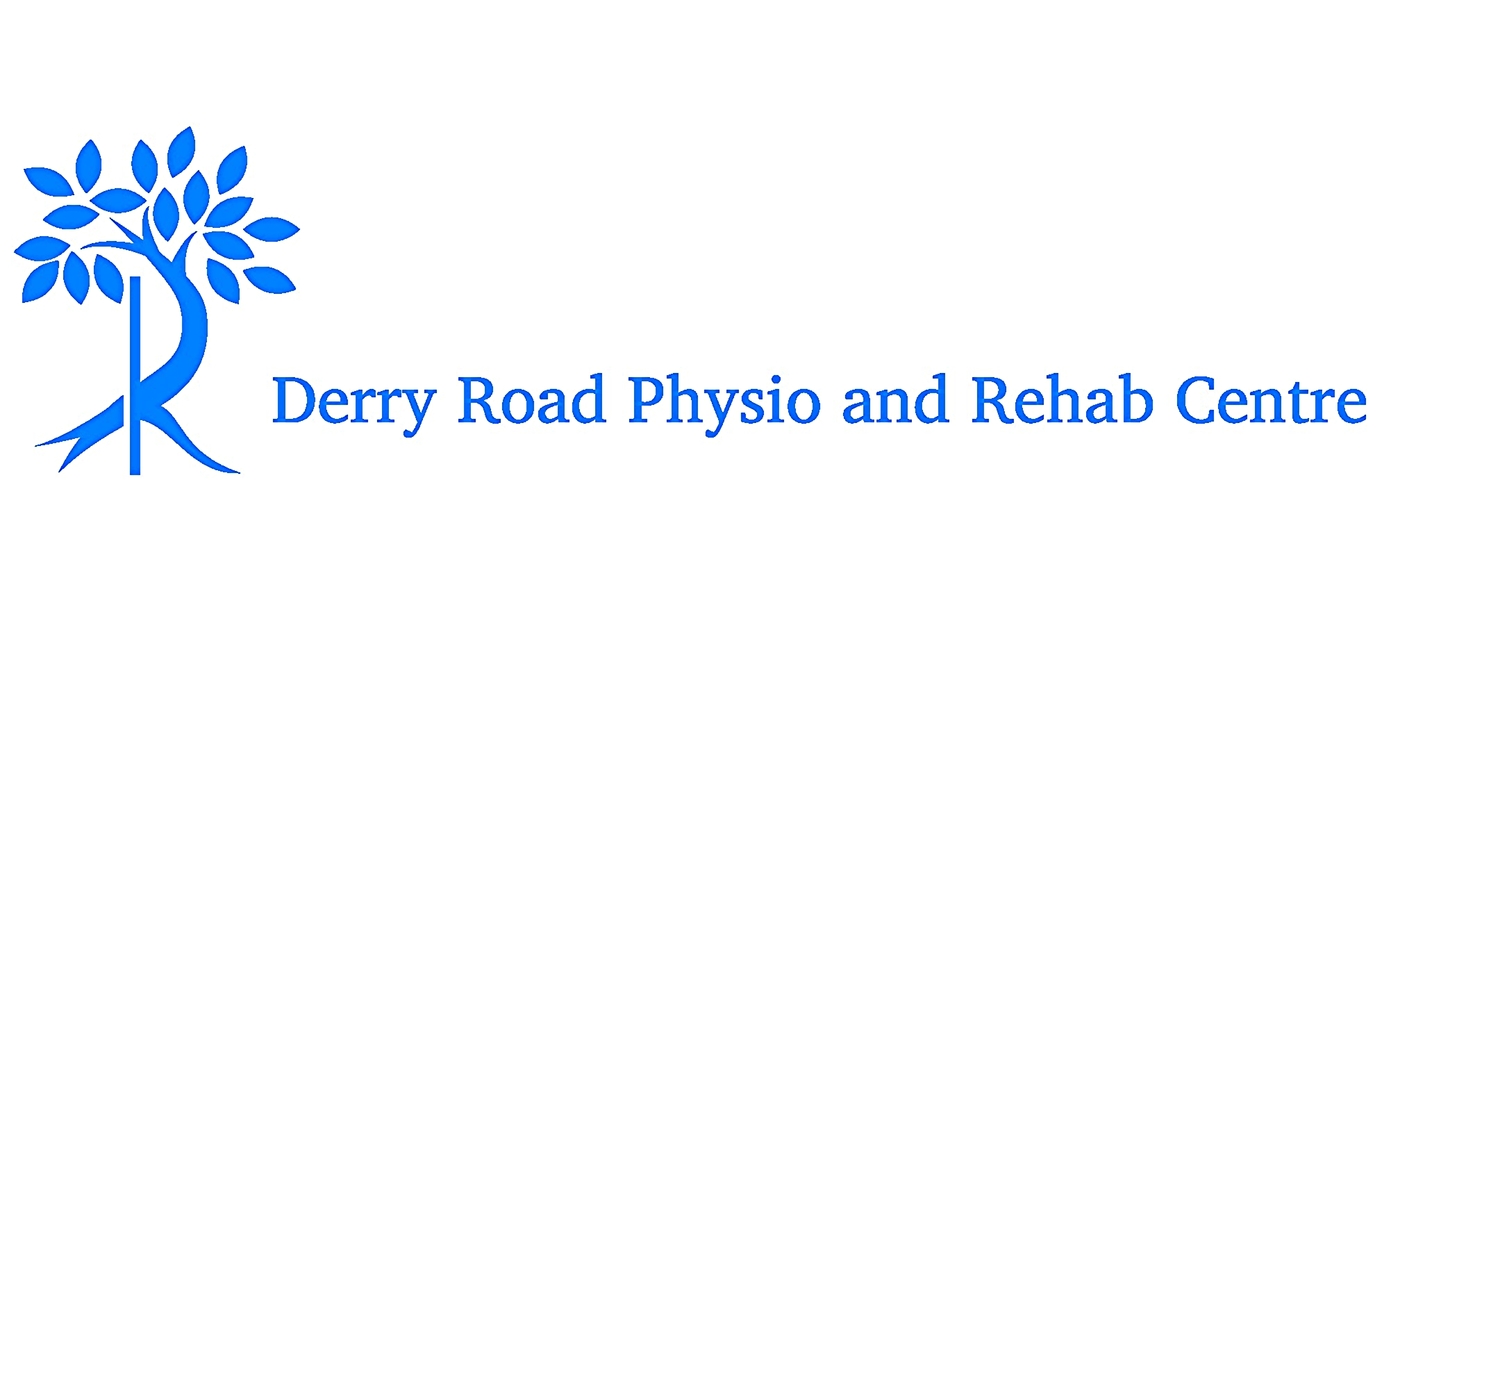 Derry Road Physiotherapy and Rehabilitation Centre